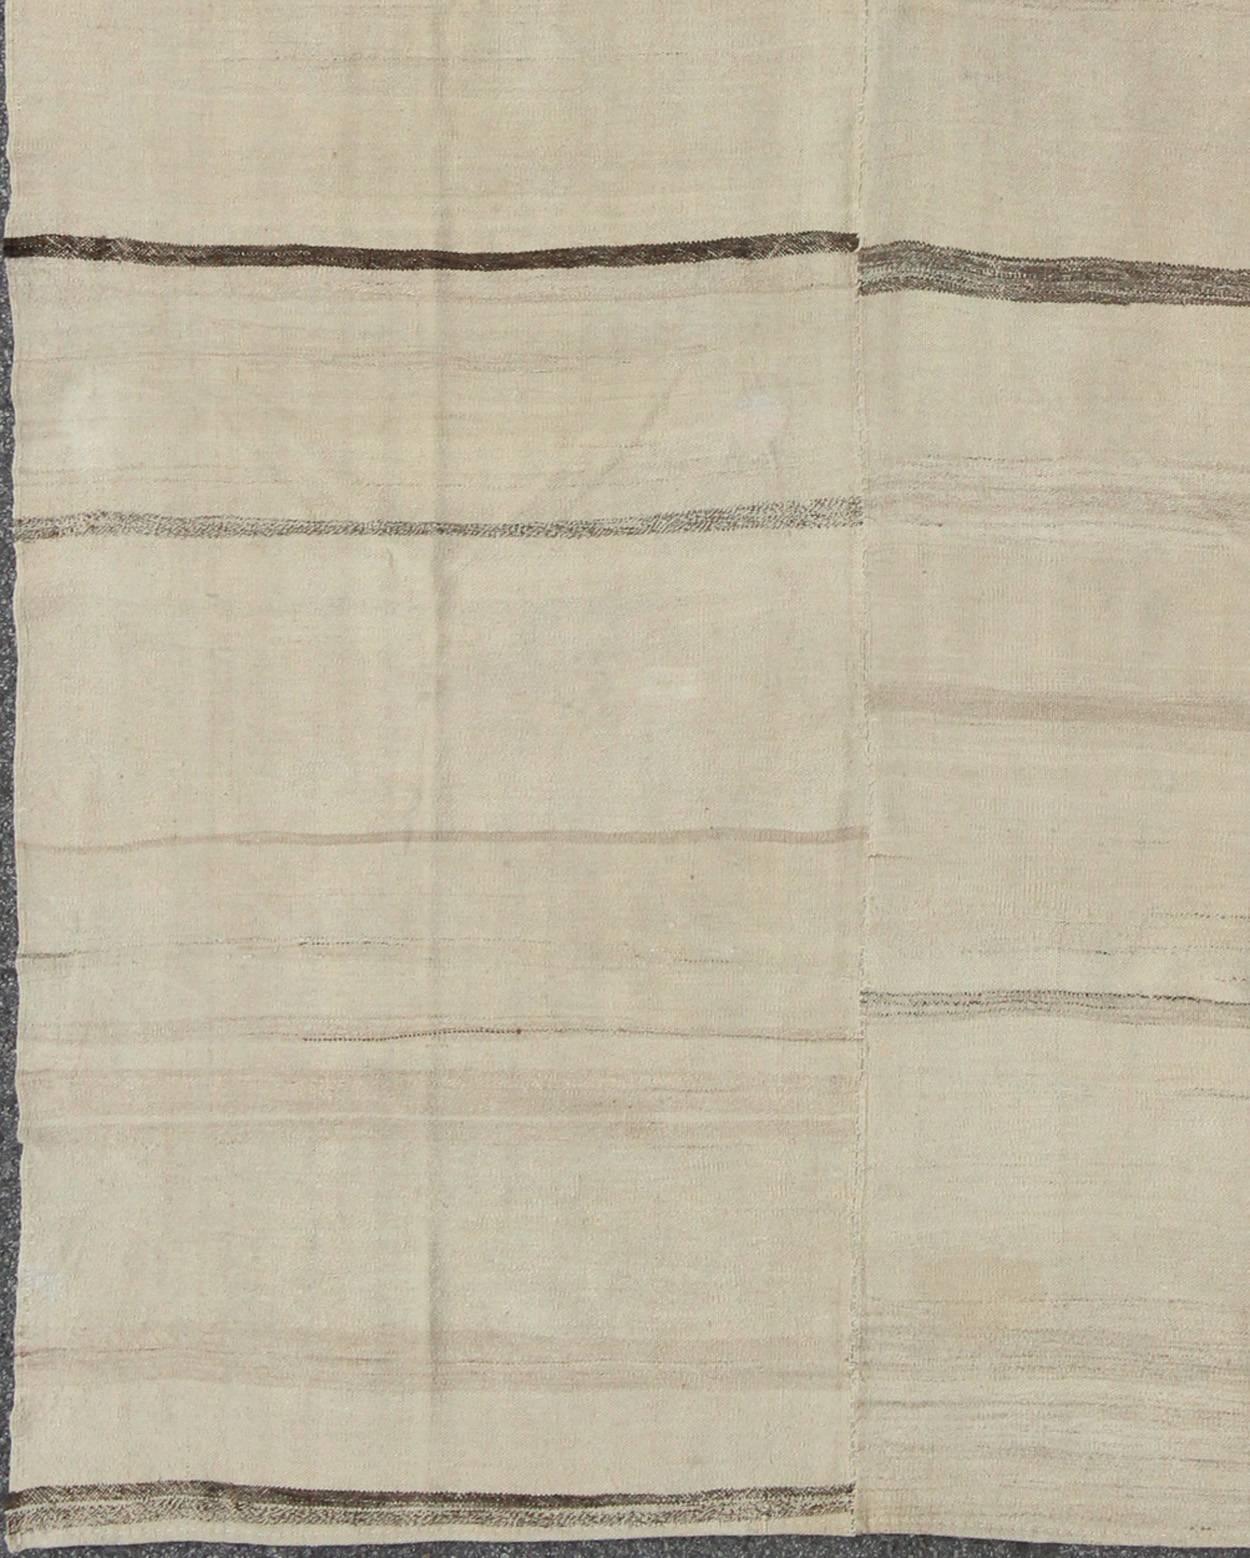 Brown and cream horizontal stripe vintage Turkish Kilim rug of two panels, rug tu-ned-1113, country of origin / type: Turkey / Kilim, circa 1950

Made from two flat-weave panels that were sewn together, this mid-century vintage Kilim is set on an